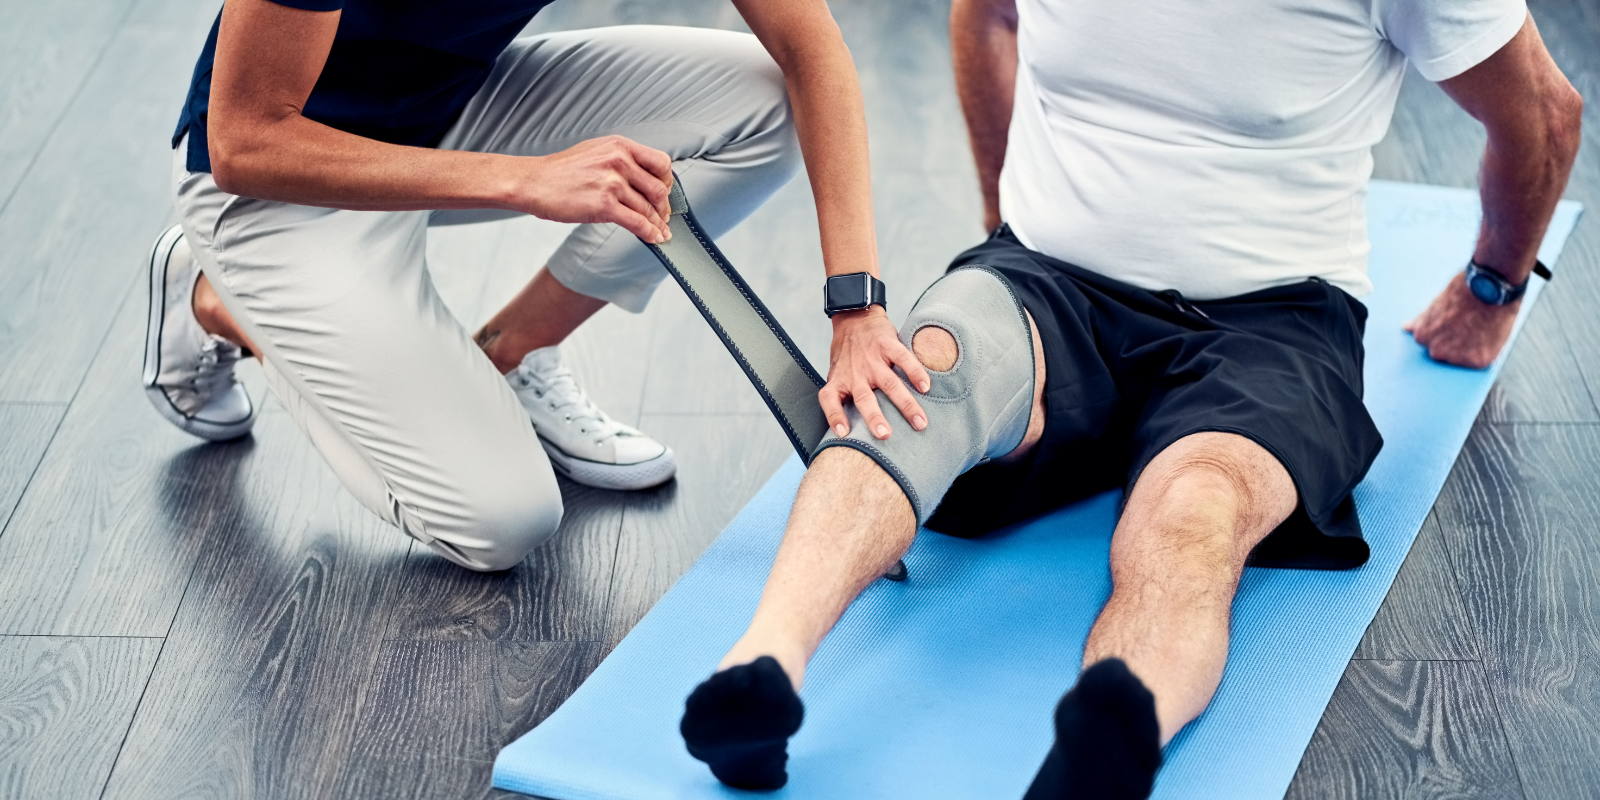 Finding the right knee brace for your recovery program